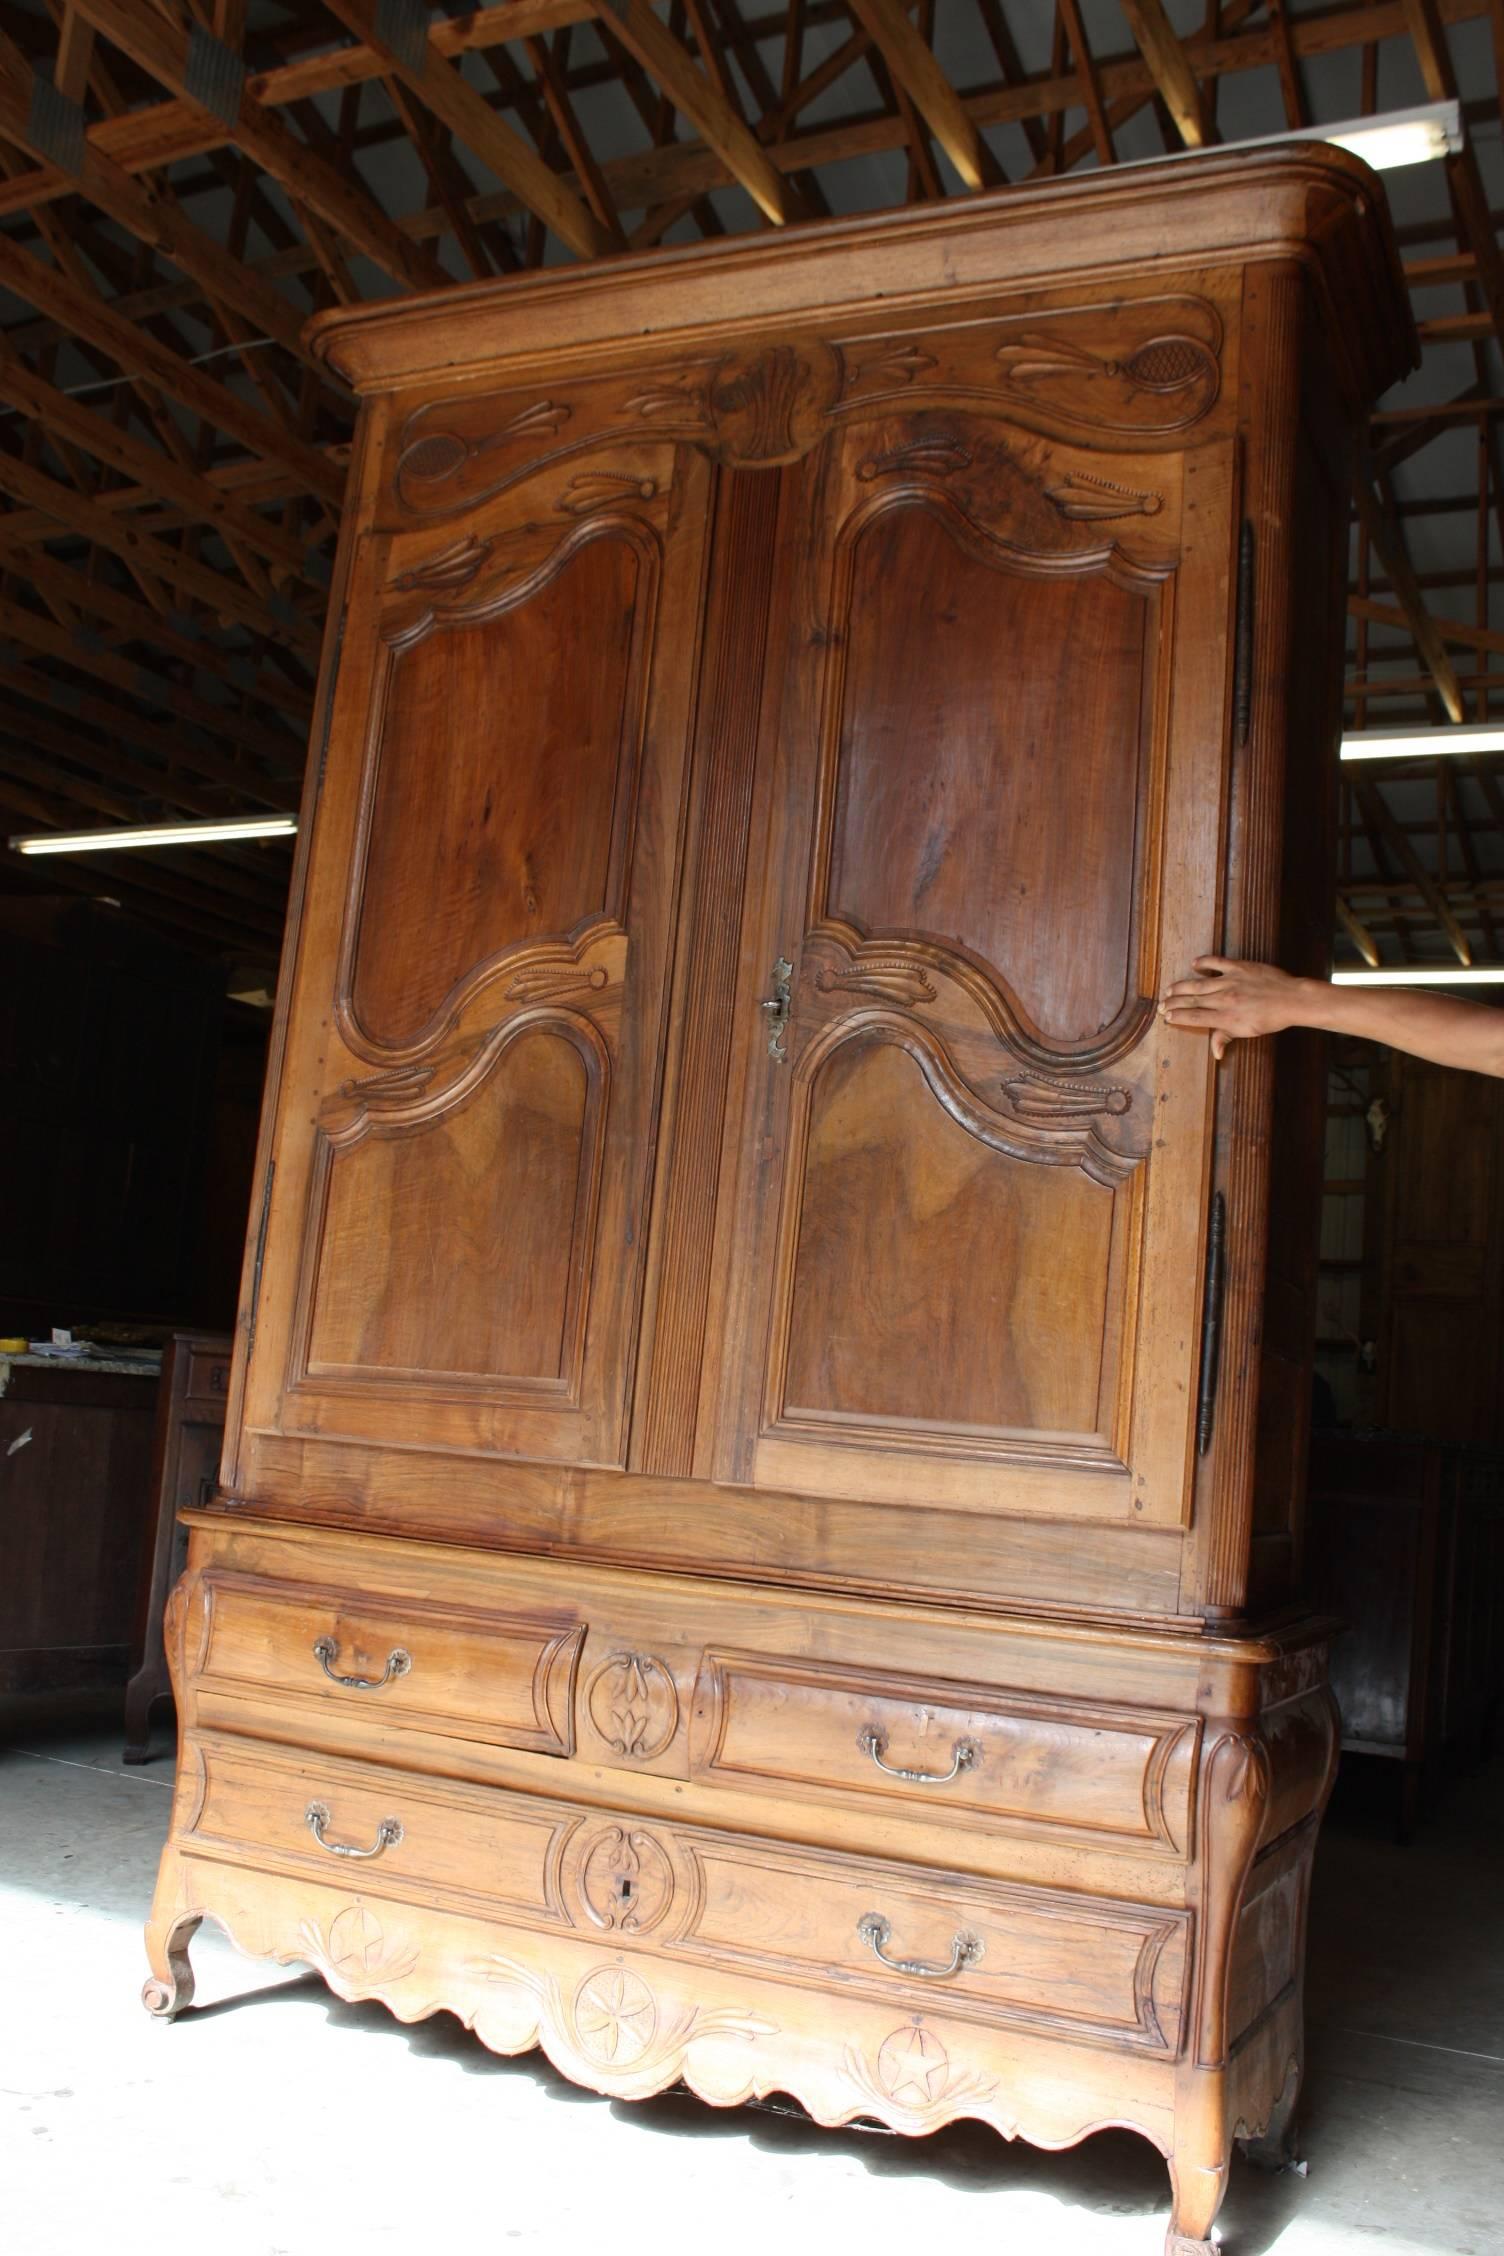 A wonderful statement piece for a master bedroom or a TV center for a den!